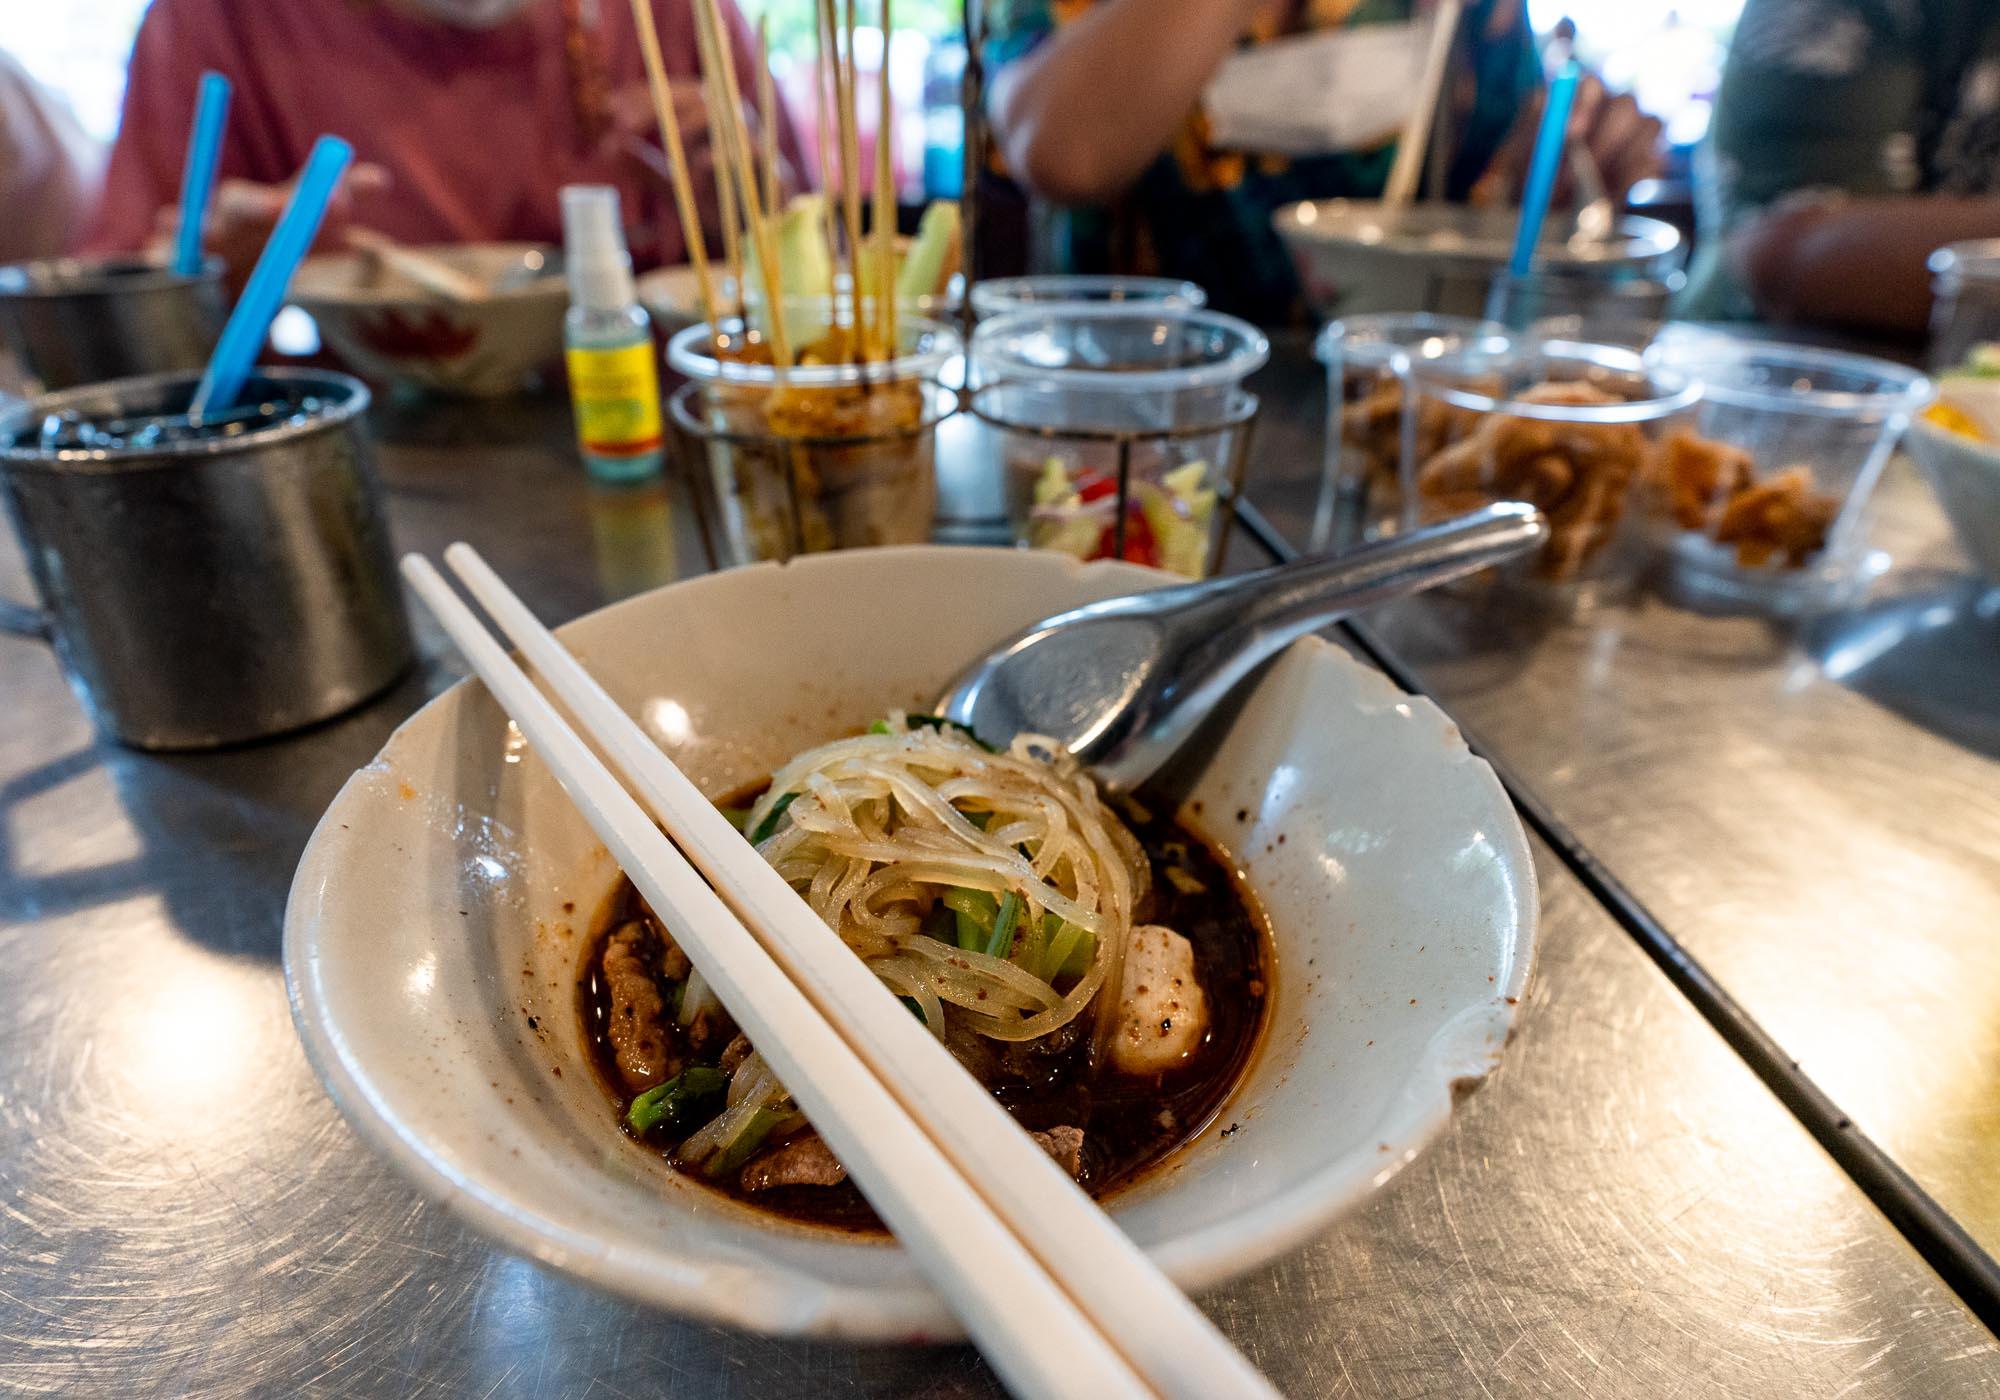 The noodles are traditionally served with a dark broth and pork or beef, along with a few meatballs. – © Michael Turtle